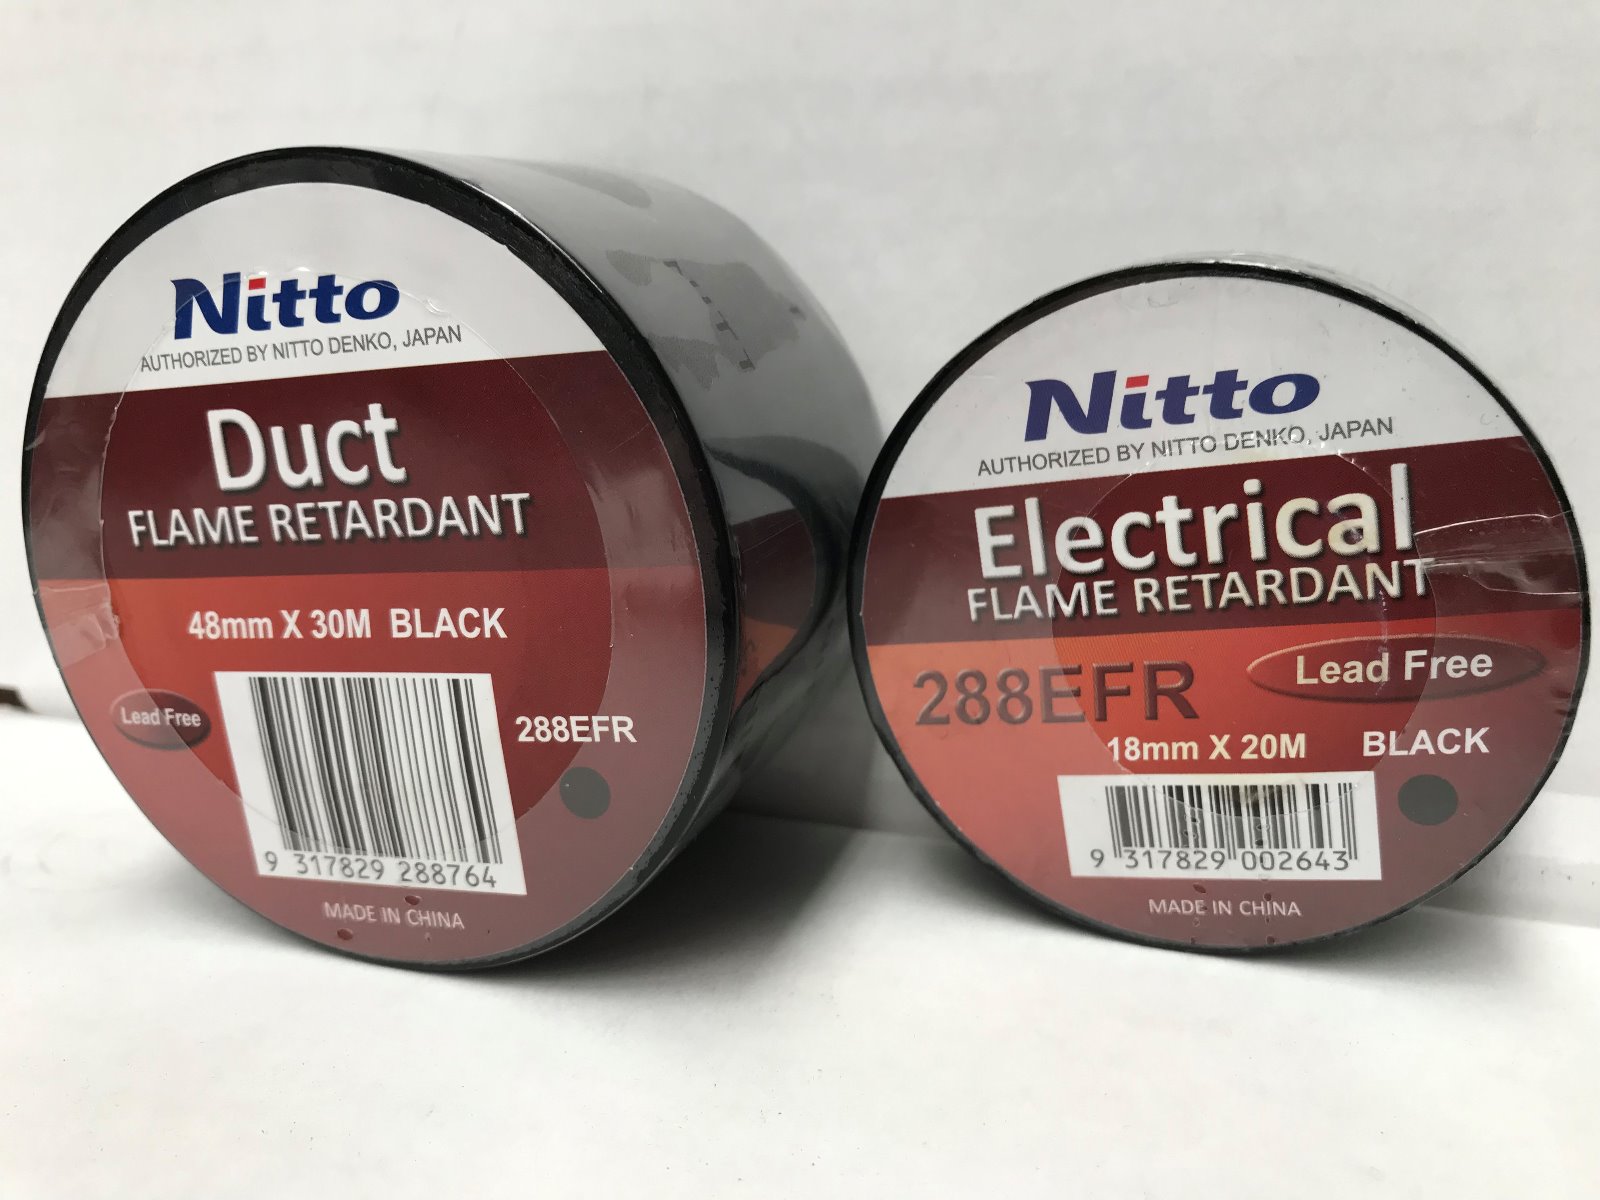 Nitto 288EFR Flame Retardant Electrical Tape & Duct Tape